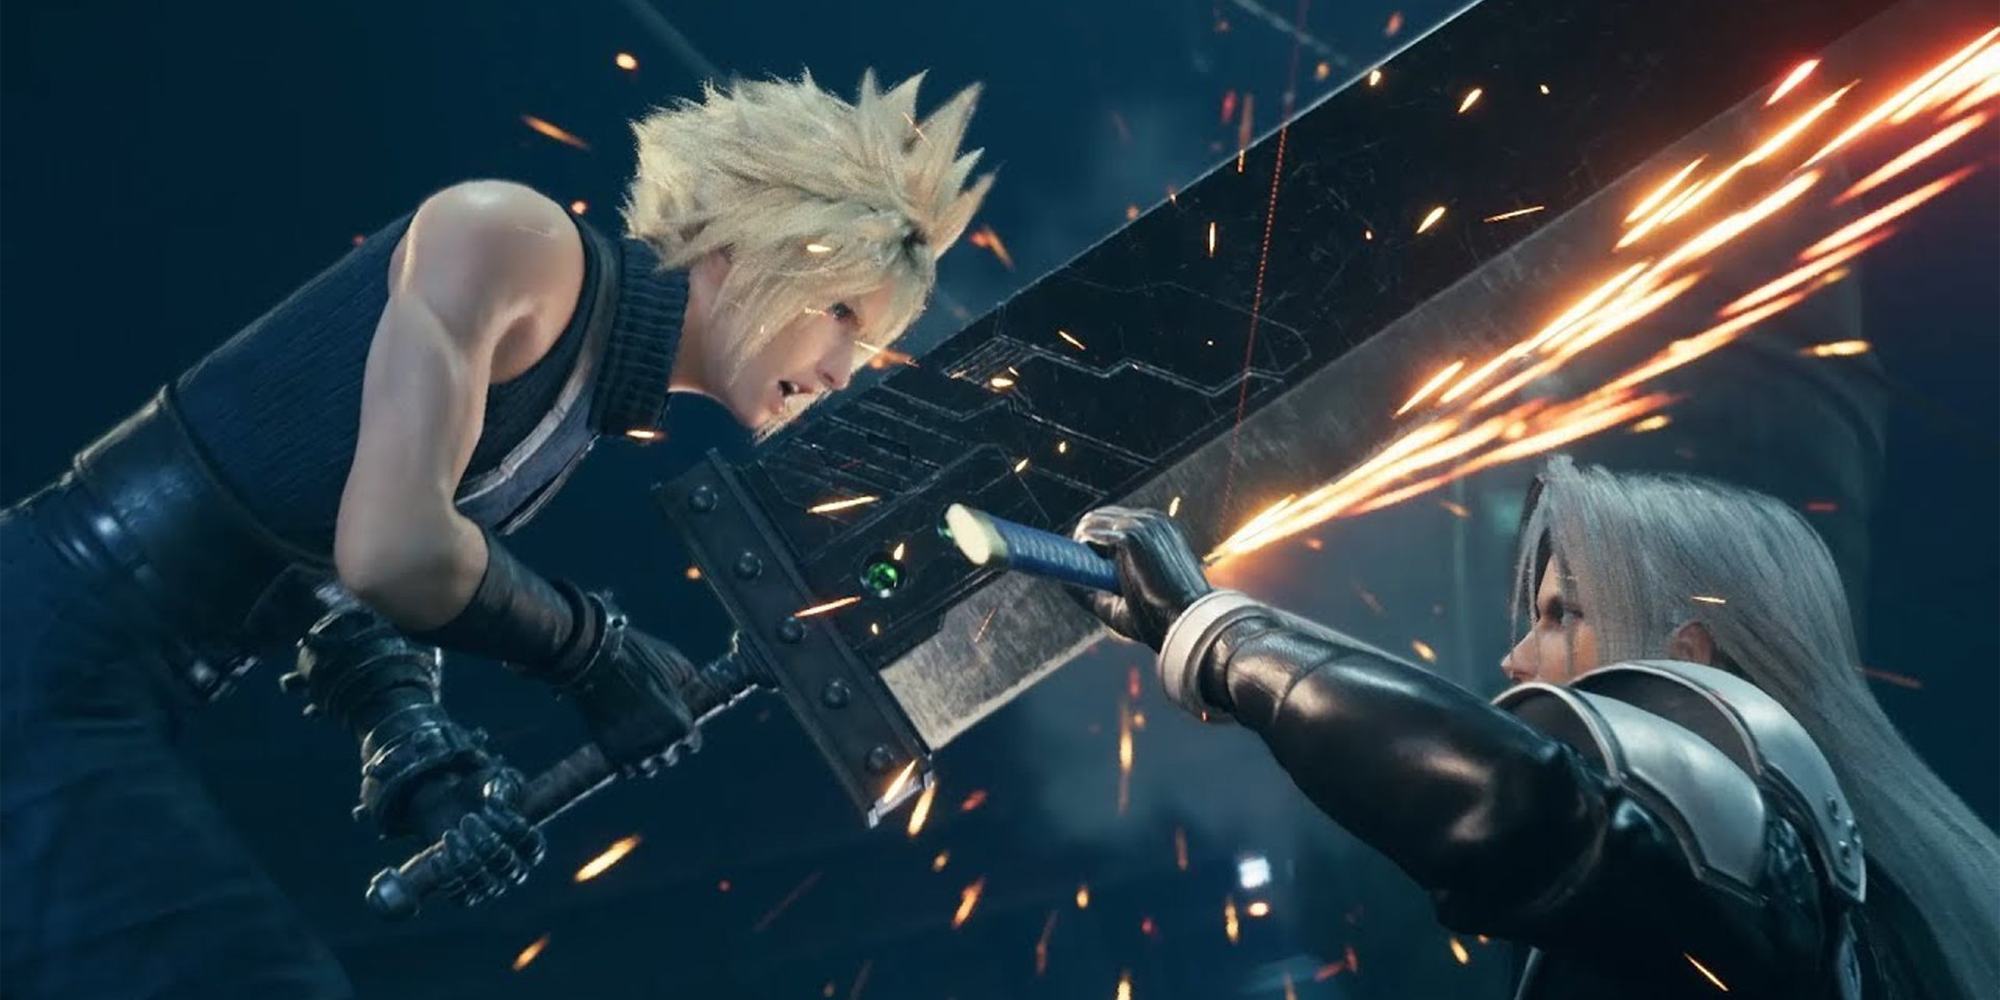 Final Fantasy 7 Remake Sephiroth and Cloud